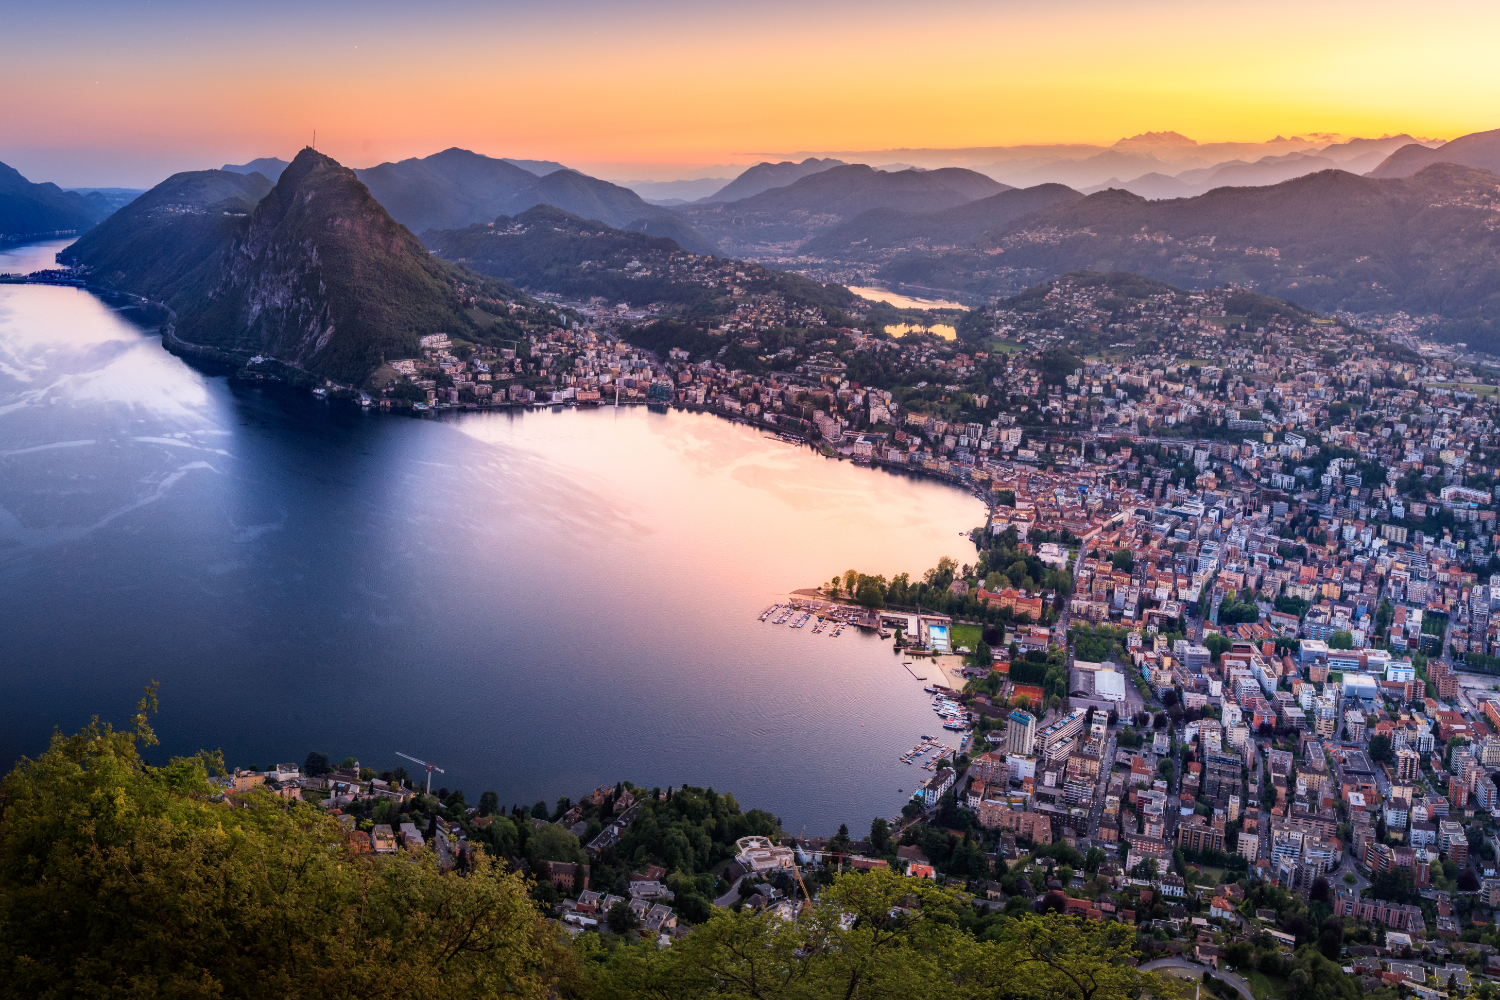 Lago di Lugano and an aerial view of the city